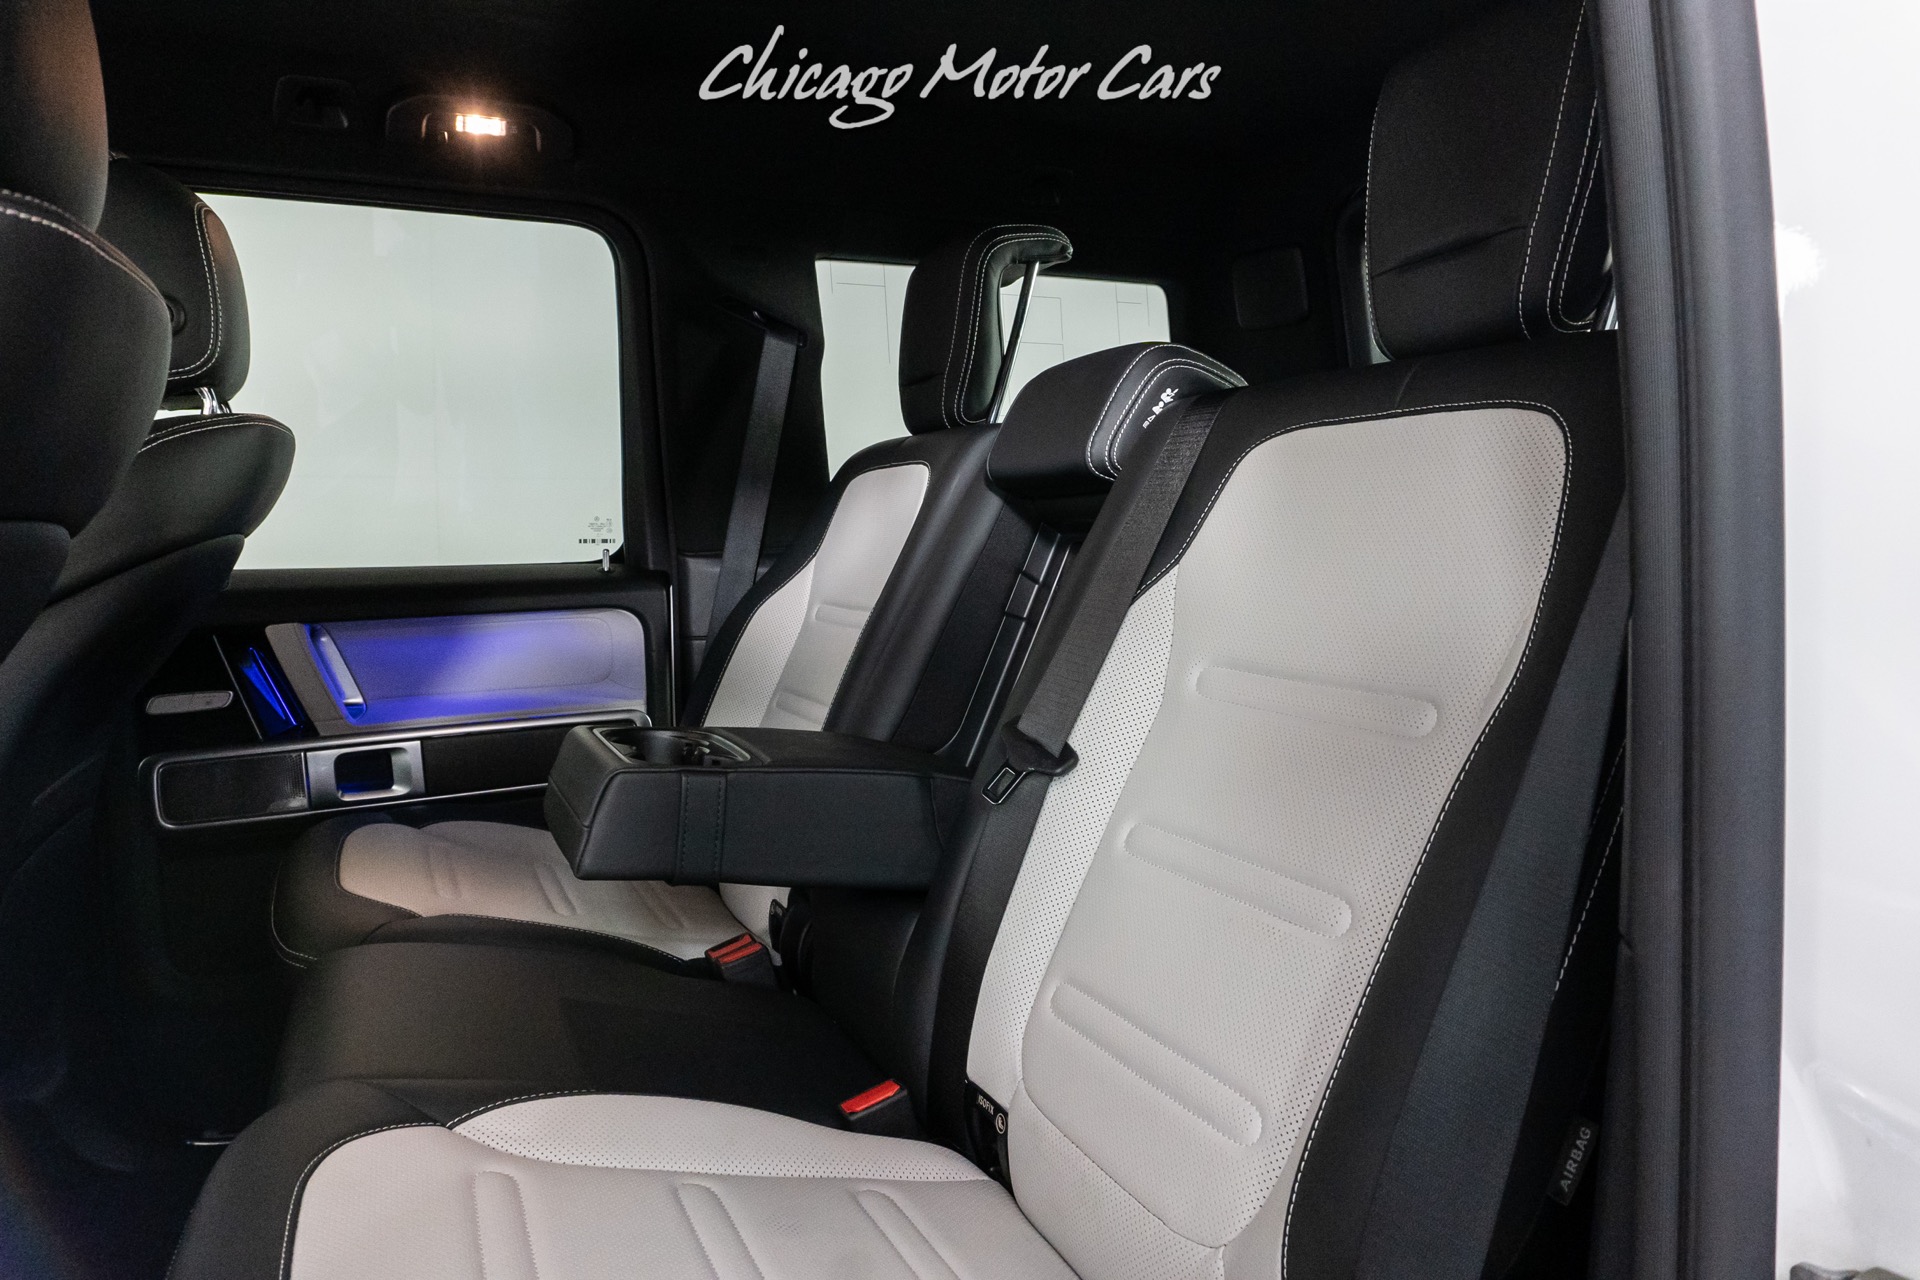 Used-2019-Mercedes-Benz-G550-SUV-EXLUSIVE-INTERIOR-PACKAGE-AMG-LINE-COMFORT-SEAT-PACKAGE